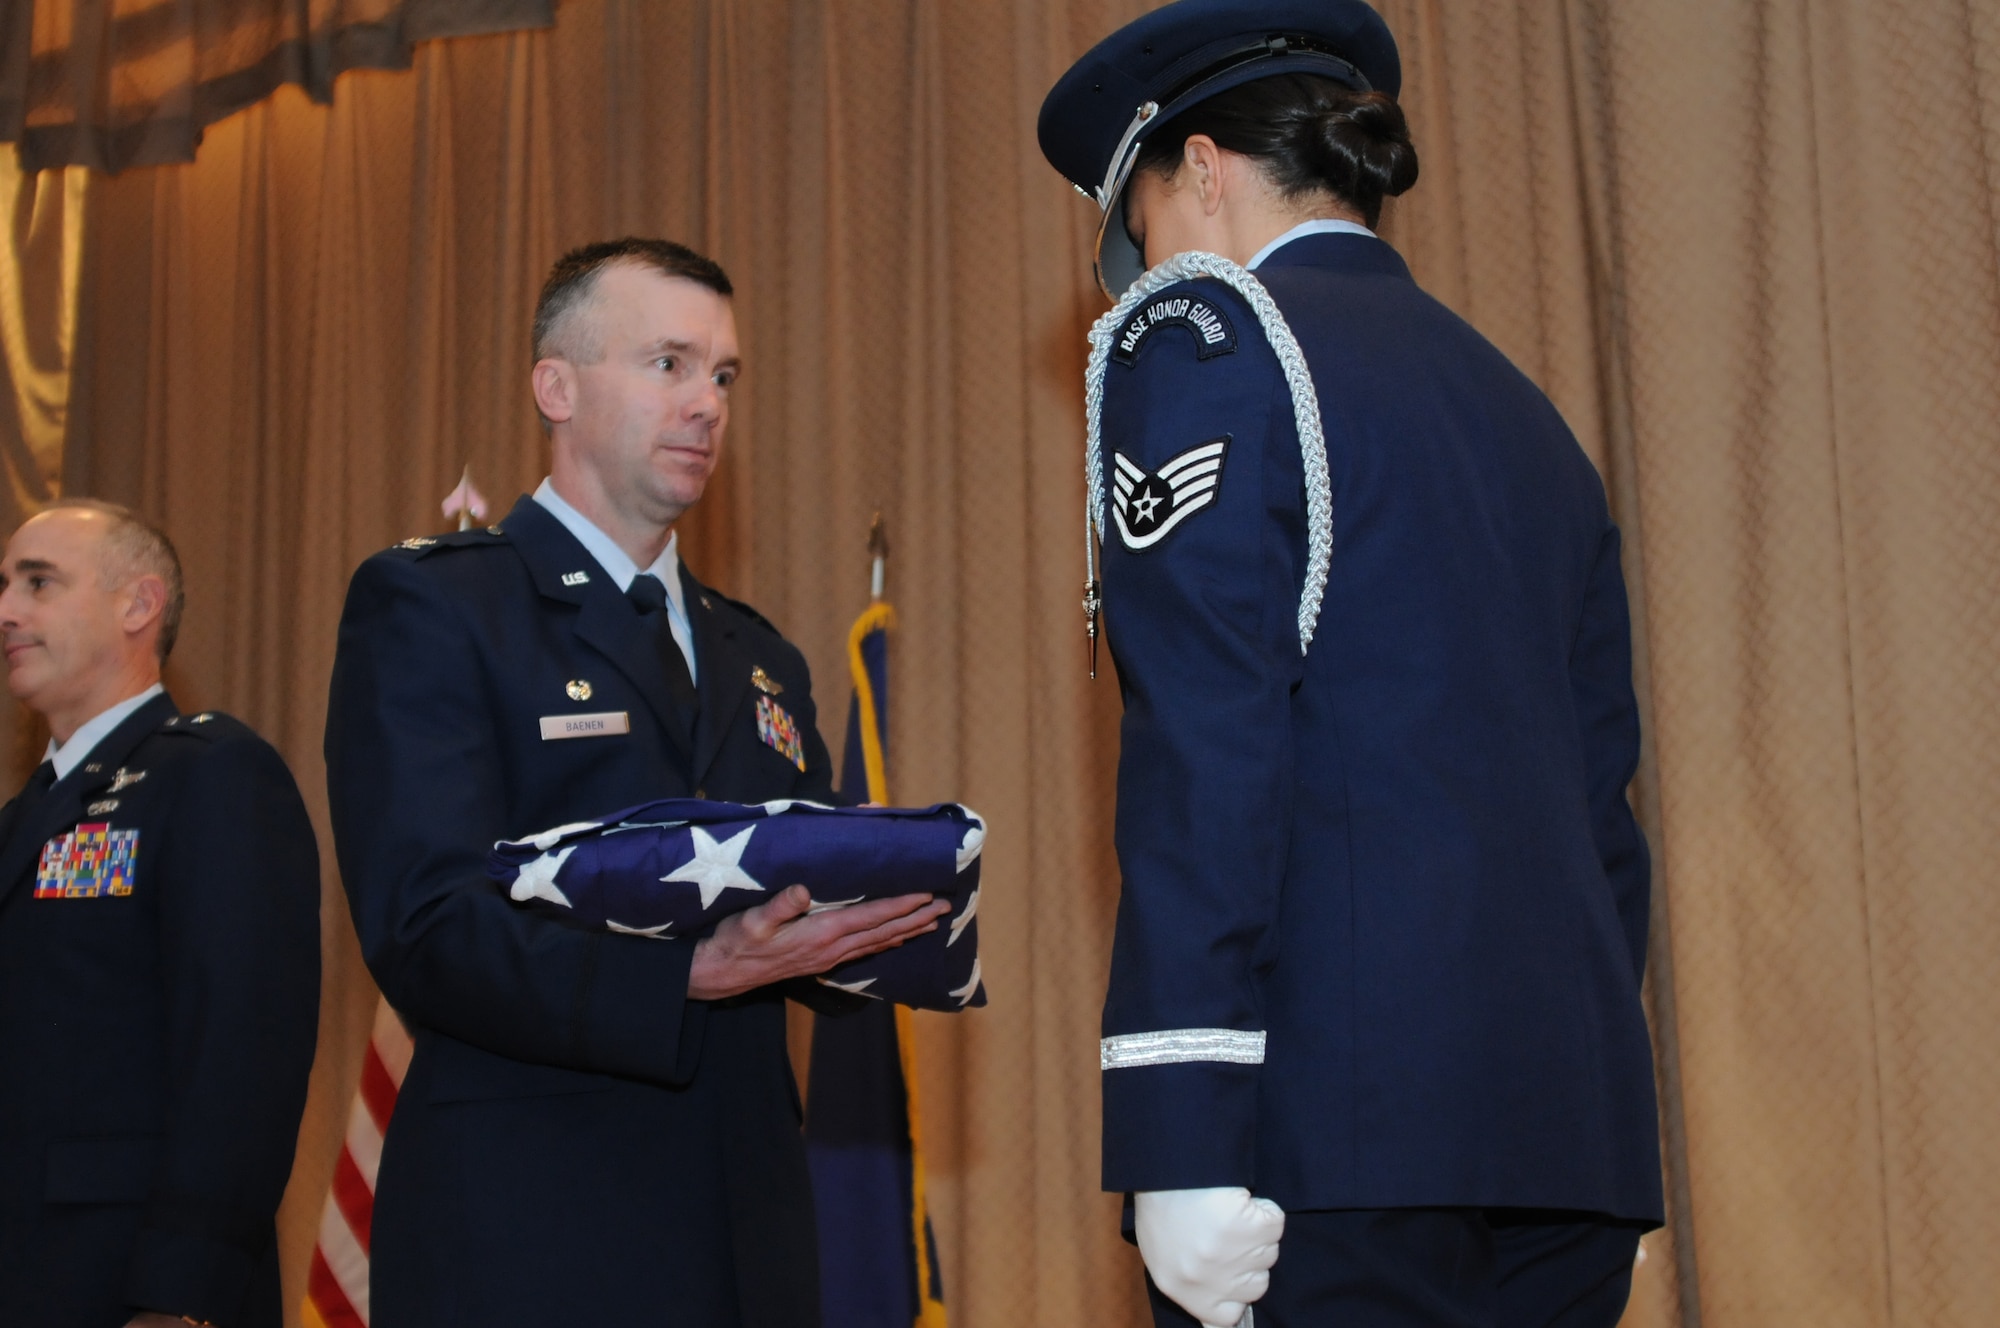 Col. Jeremy “Weed” Baenen accepts a flag in honor of his 26 years of service to the United States Air Force and the Oregon Air National Guard during his retirement ceremony, Nov. 21, 2014 at Kingsley Field in Klamath Falls, Ore. The day marked his last as the 173rd Fighter Wing Commander. (U.S. Air National Guard photo by Tech. Sgt. Jefferson Thompson/Released)